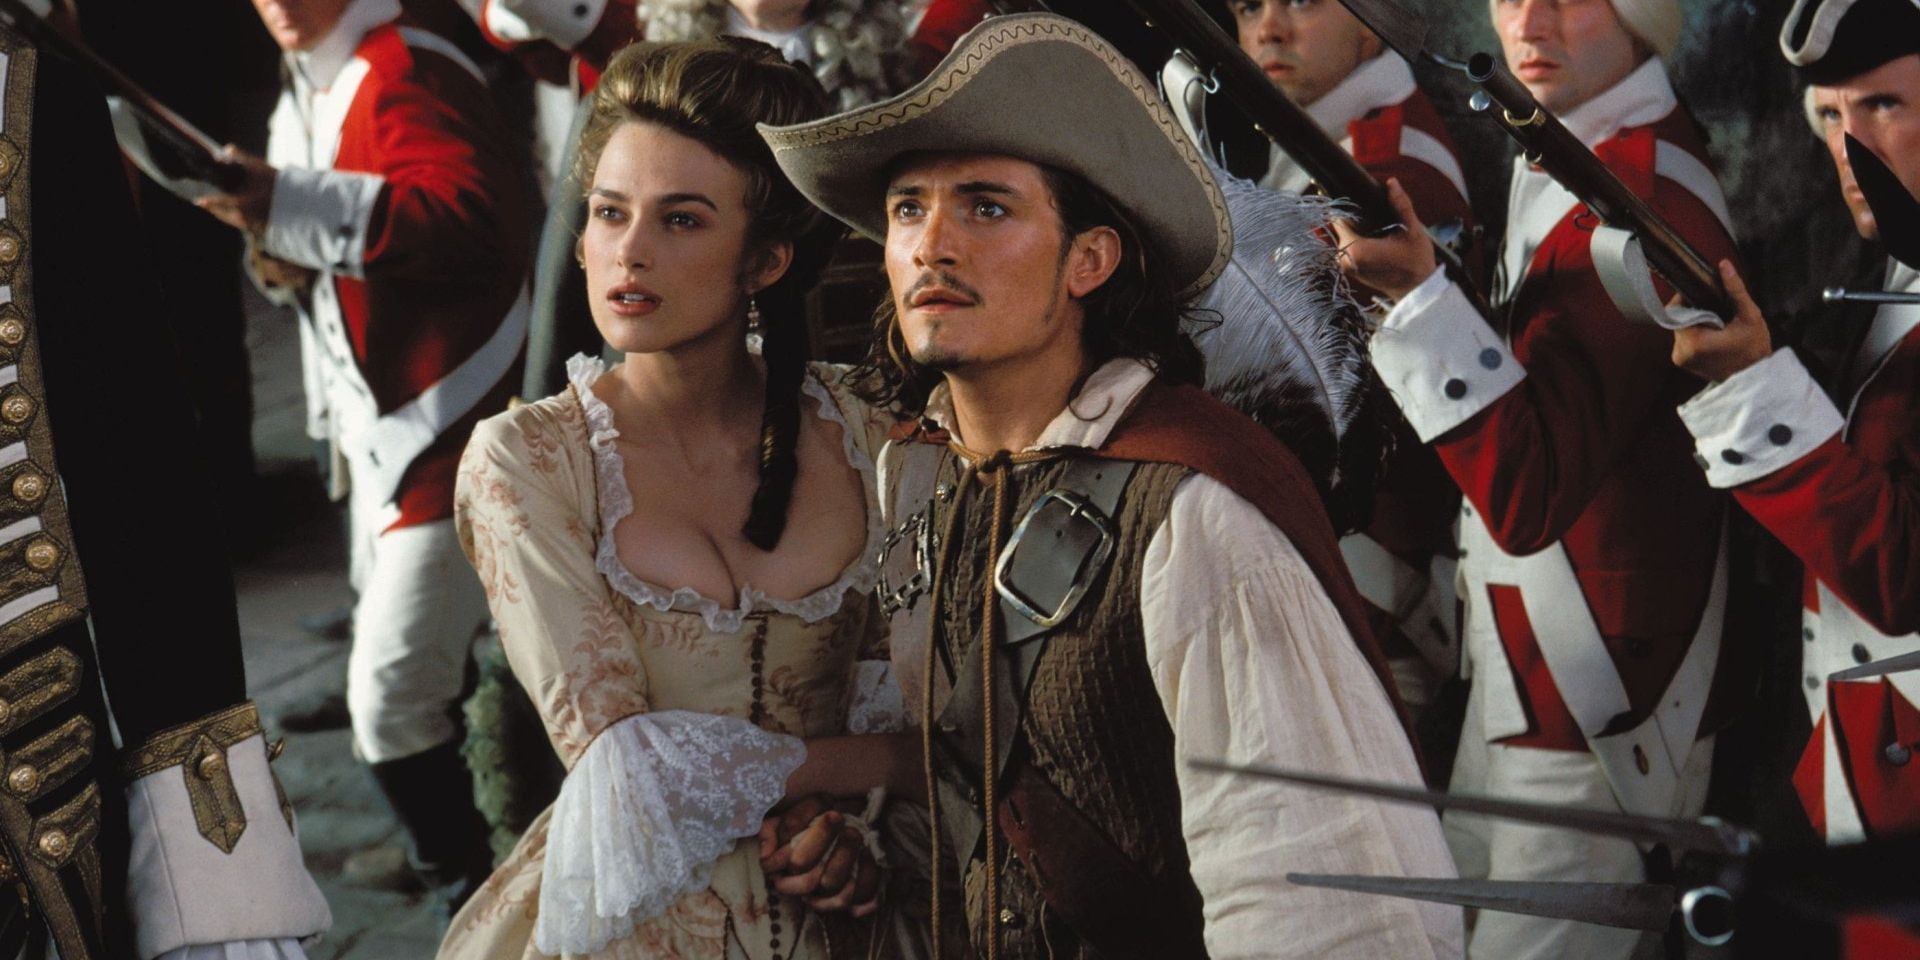 Will and Elizabeth together at the end of The Curse of the Black Pearl.